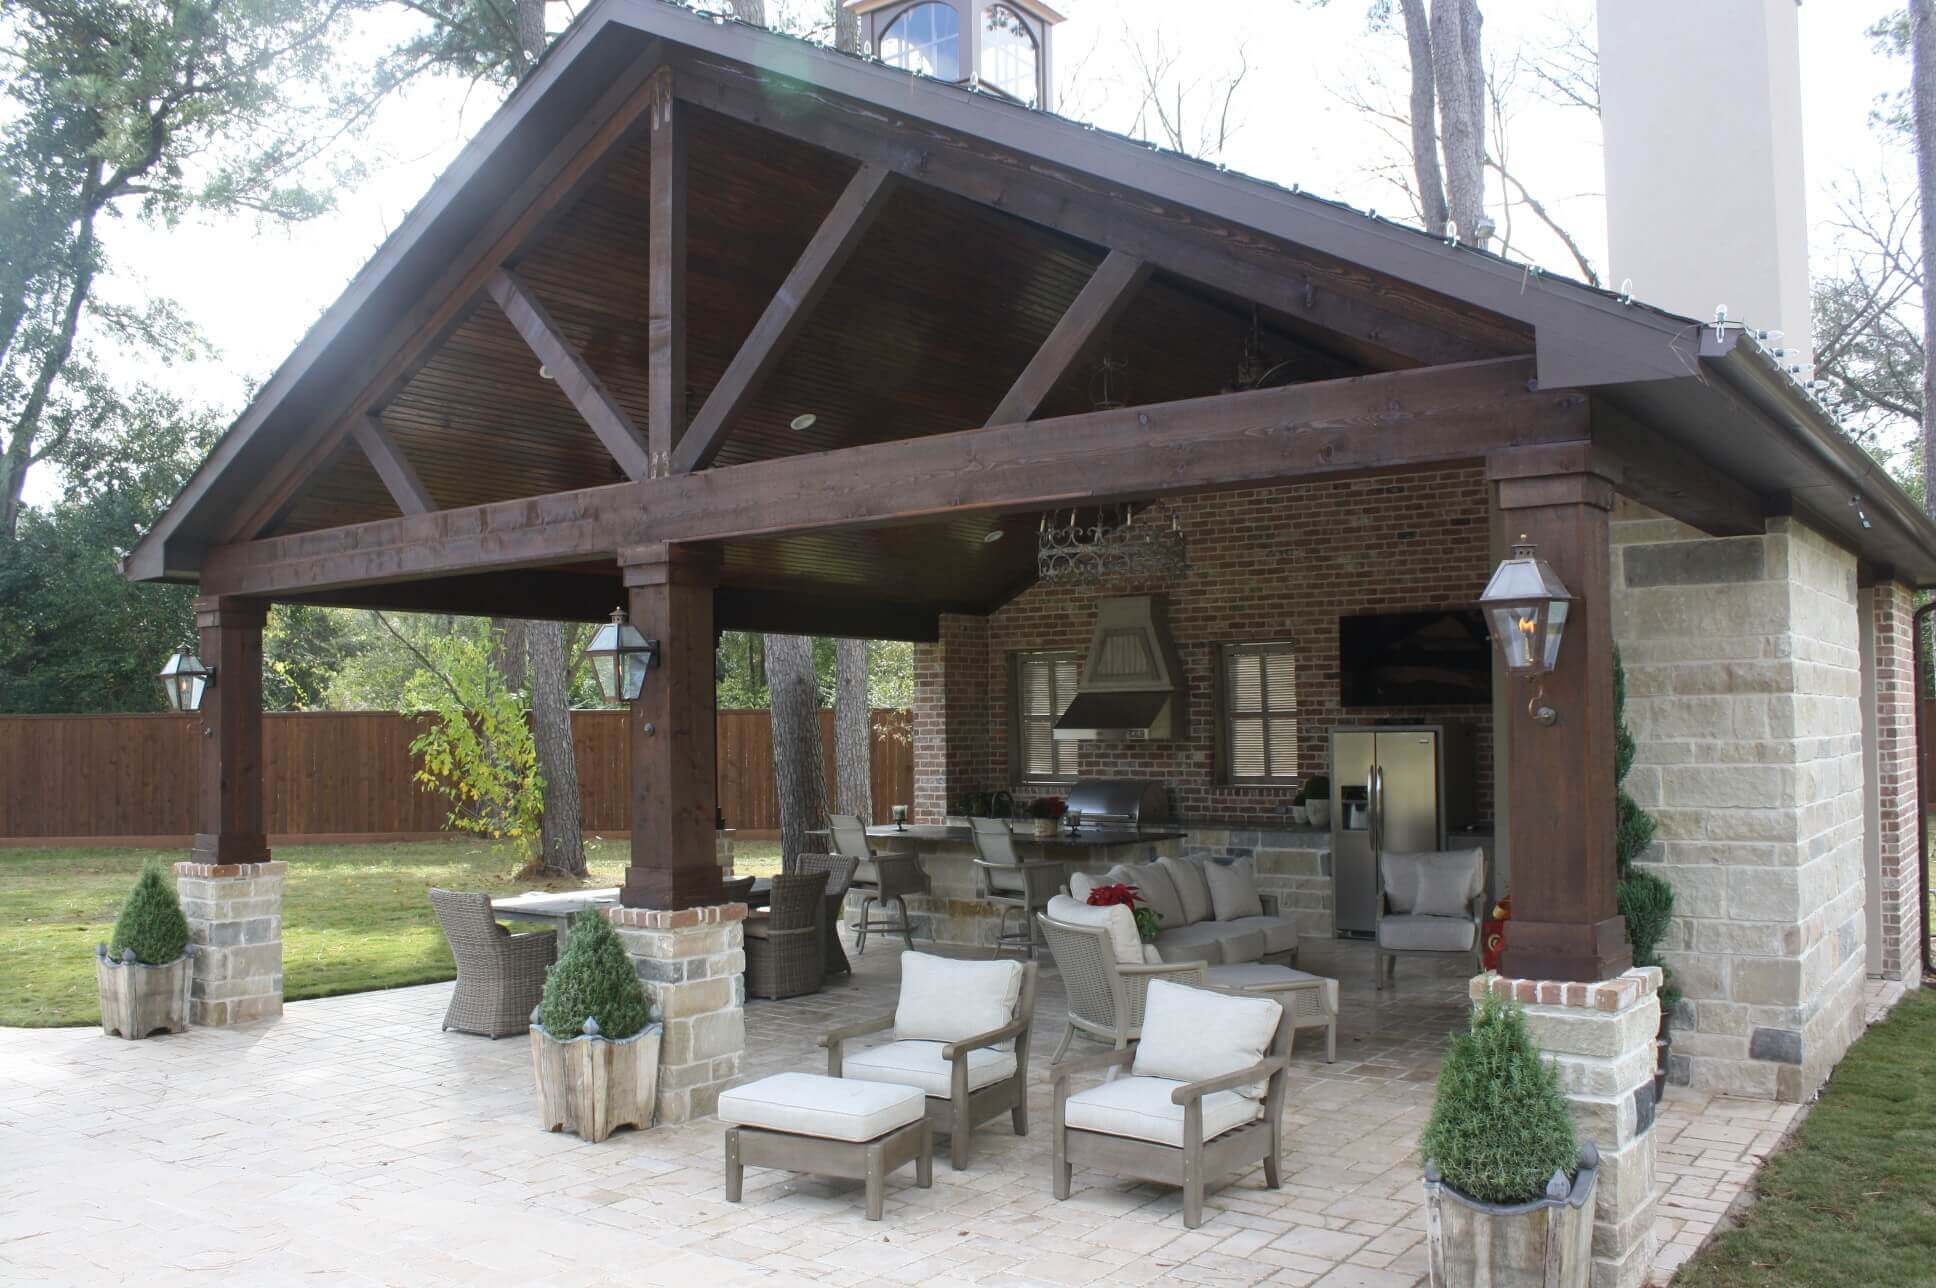 Creekstone Outdoor Living - Rustic Cabana with full Outdoor Kitchen & Living space - 1